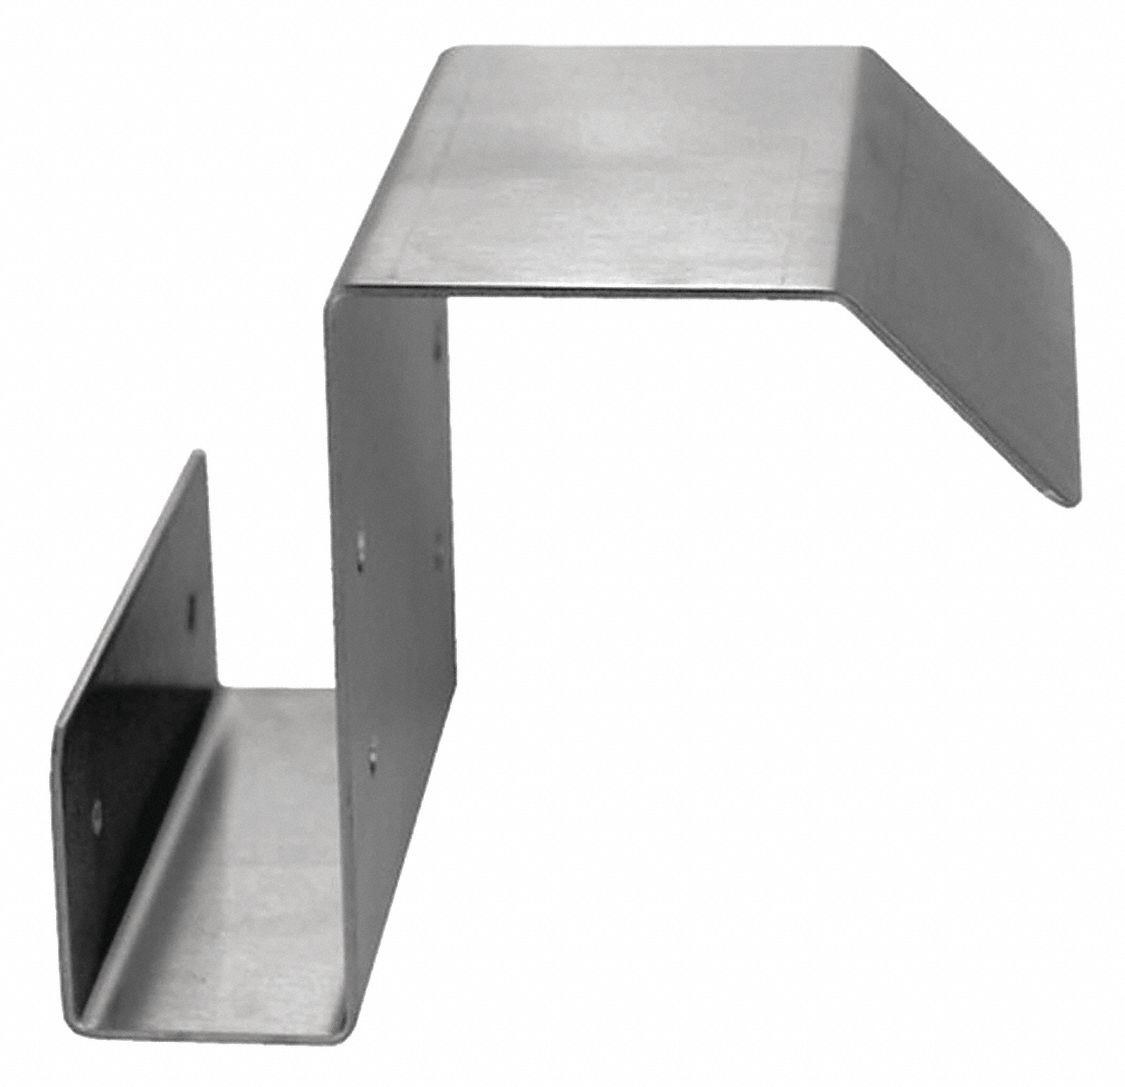 Door Pull: 5 in Lg, 4.5 in Projection, Satin, Stainless Steel